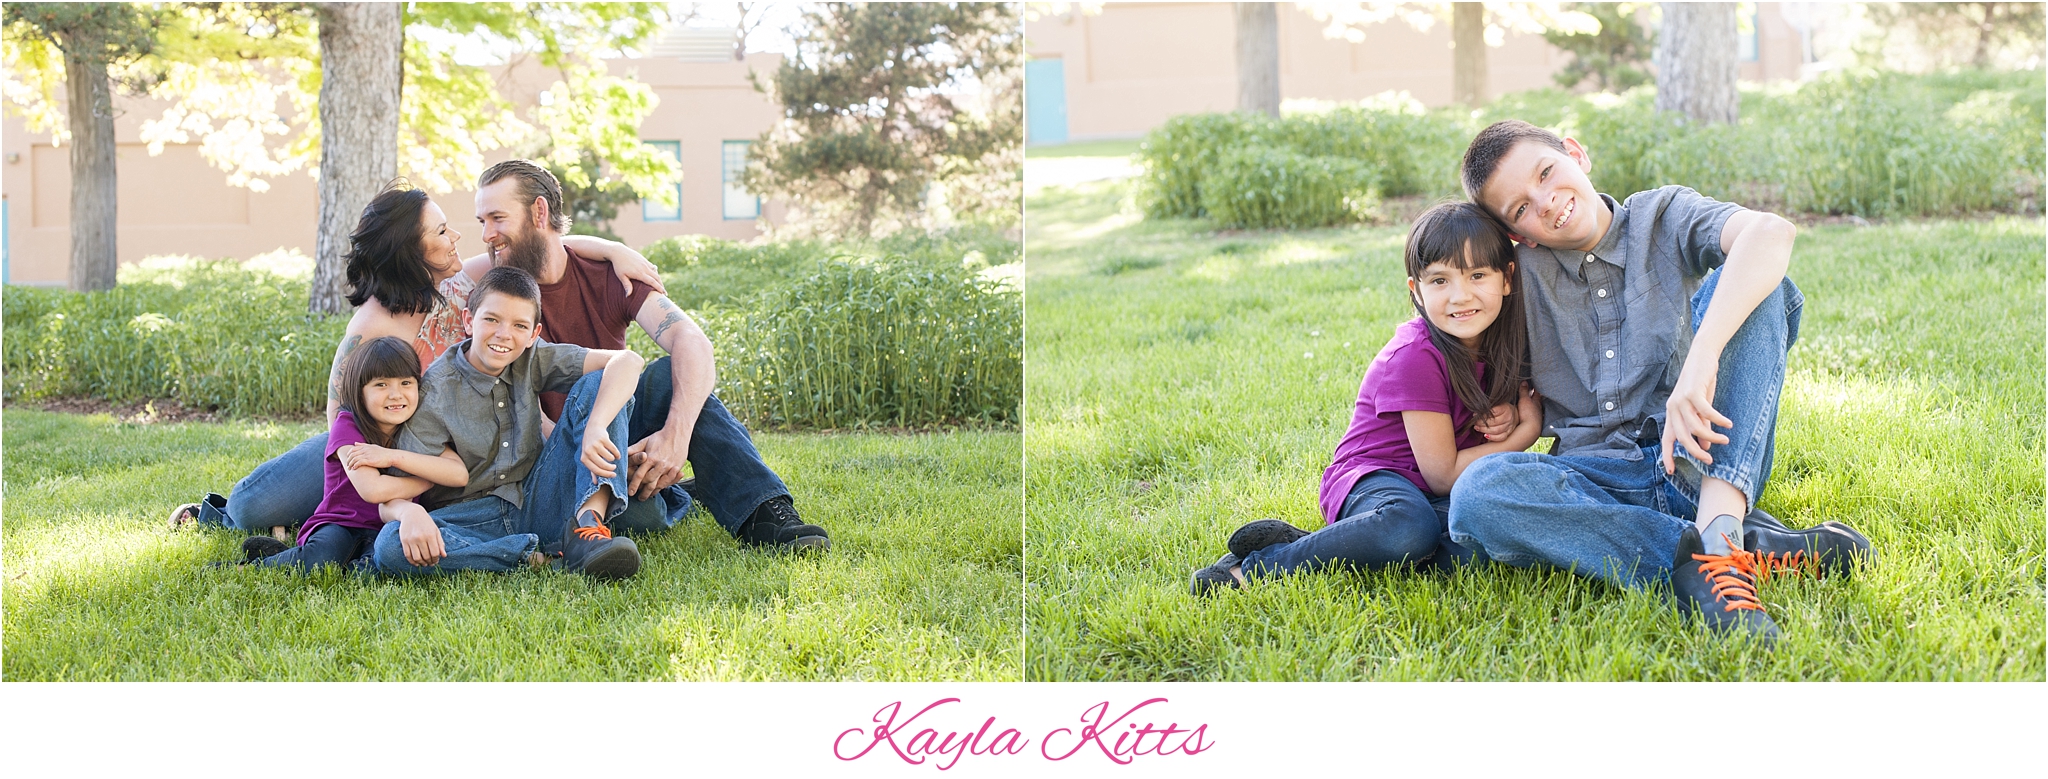 kayla kitts photography - albuquerque wedding photographer - albuquerque engagement photographer - nm wedding - albuquerque wedding - nm wedding - unm engagement - bosque engagement session_0003.jpg